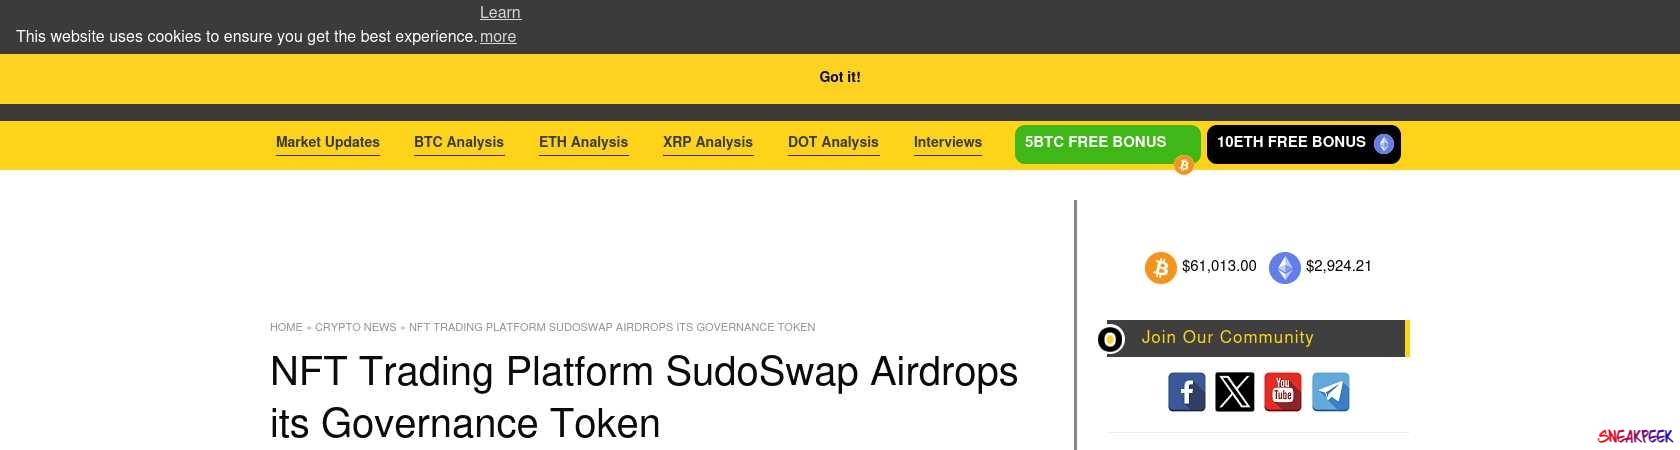 Read the full Article:  ⭲ NFT Trading Platform SudoSwap Airdrops its Governance Token